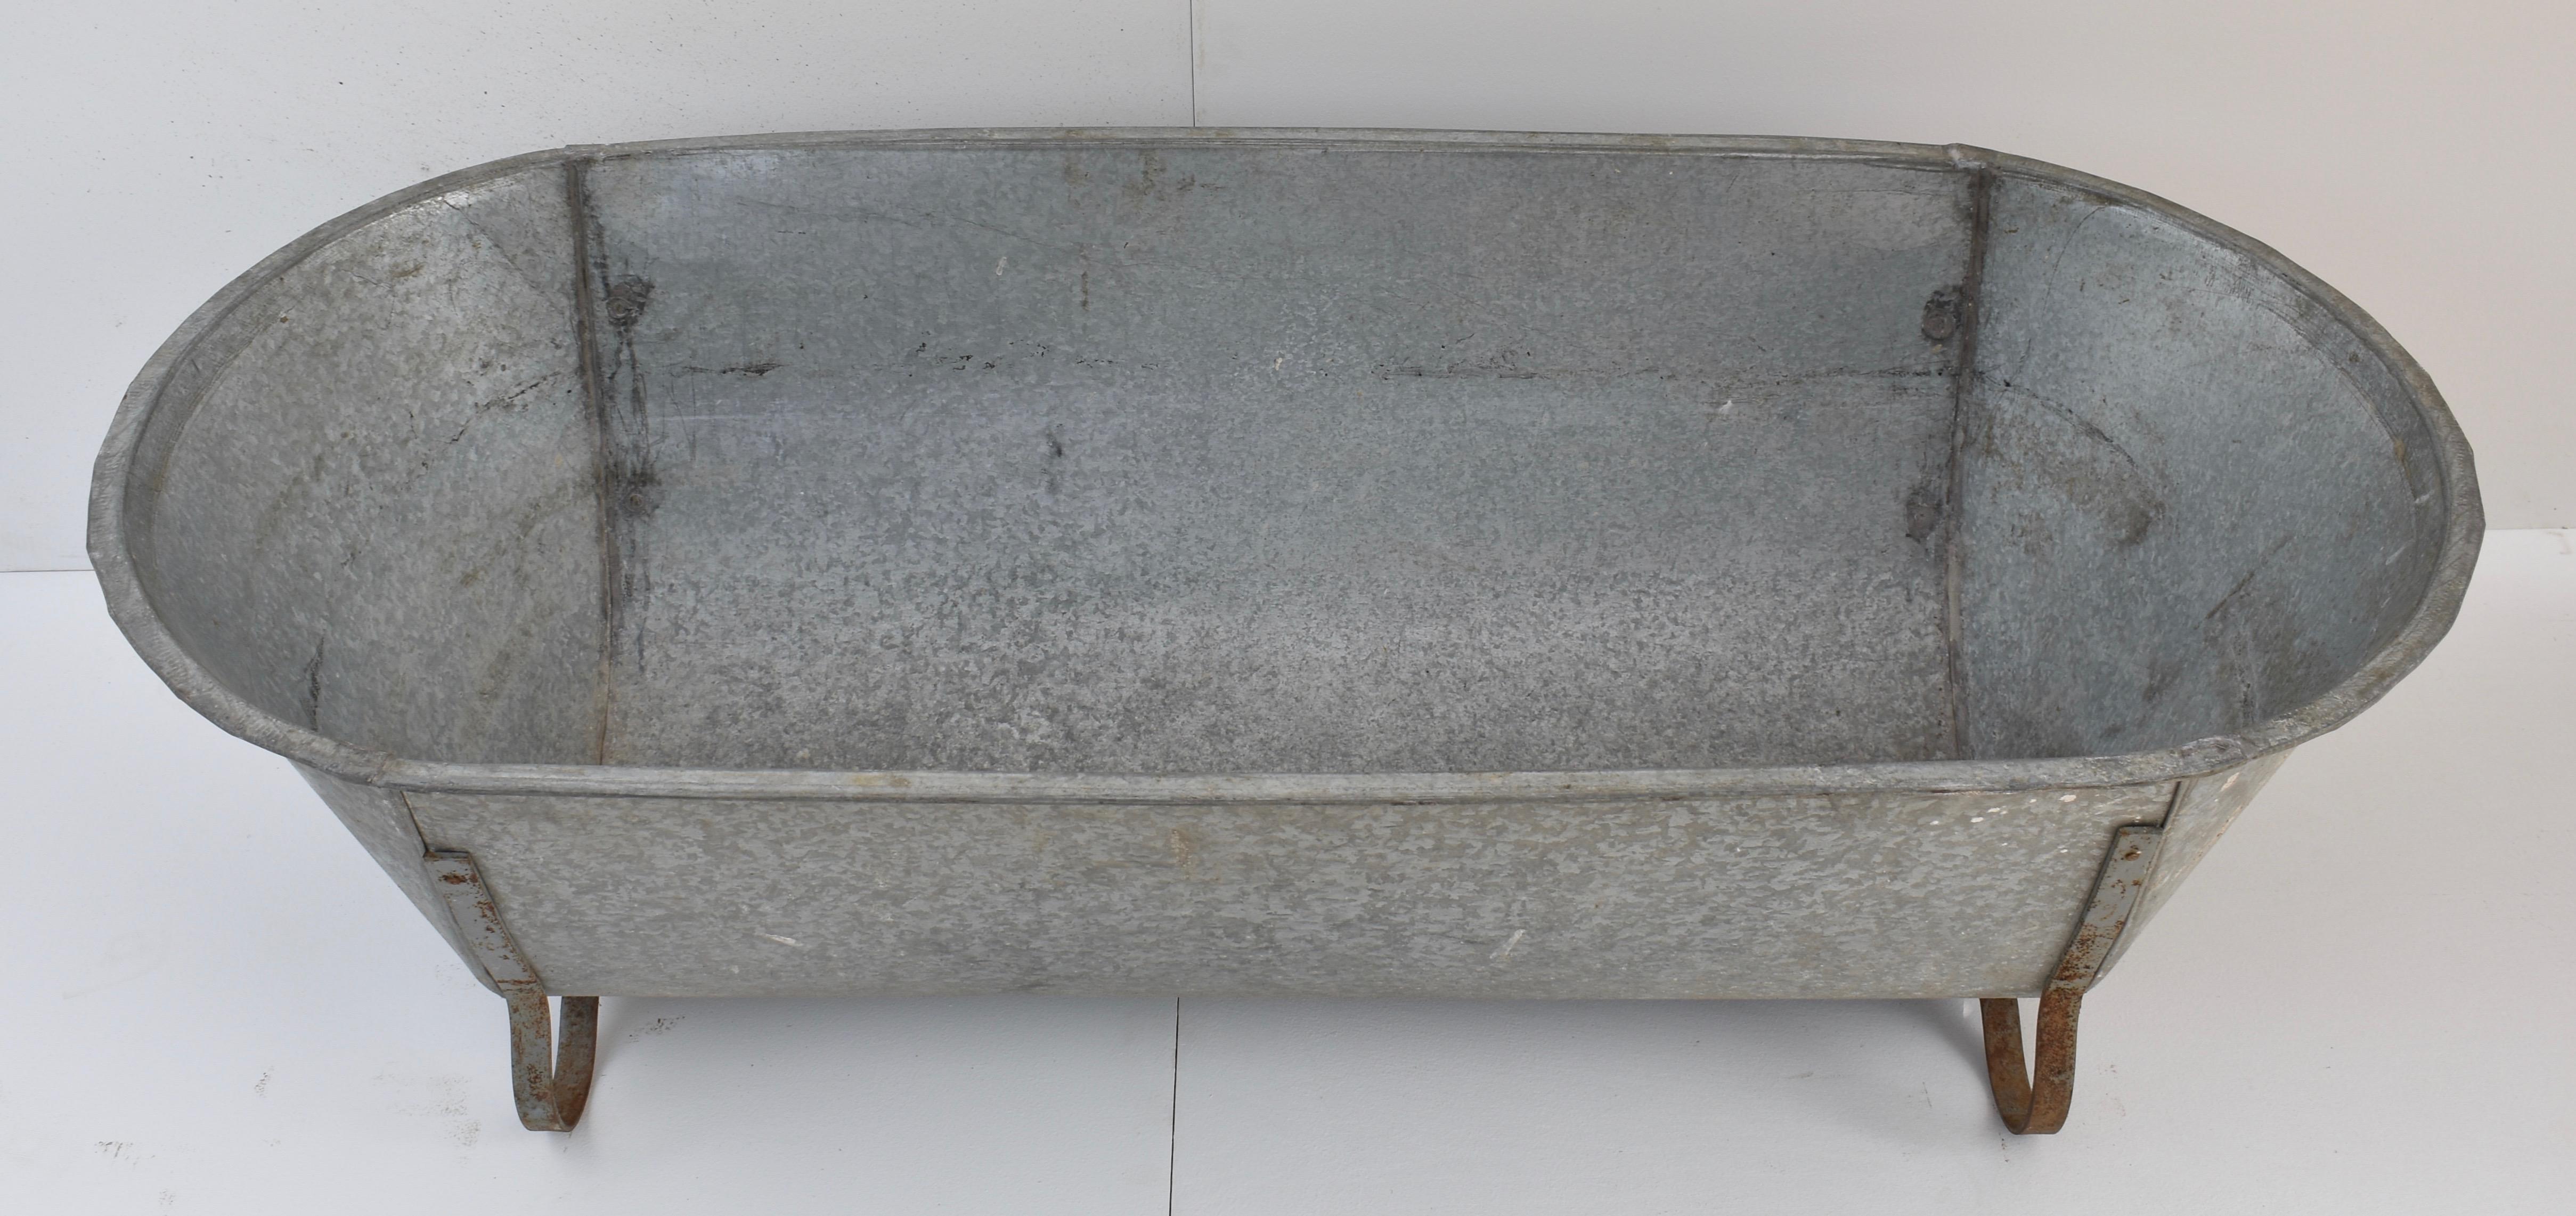 This is a Central European zinc bathtub with attractive curled iron feet.